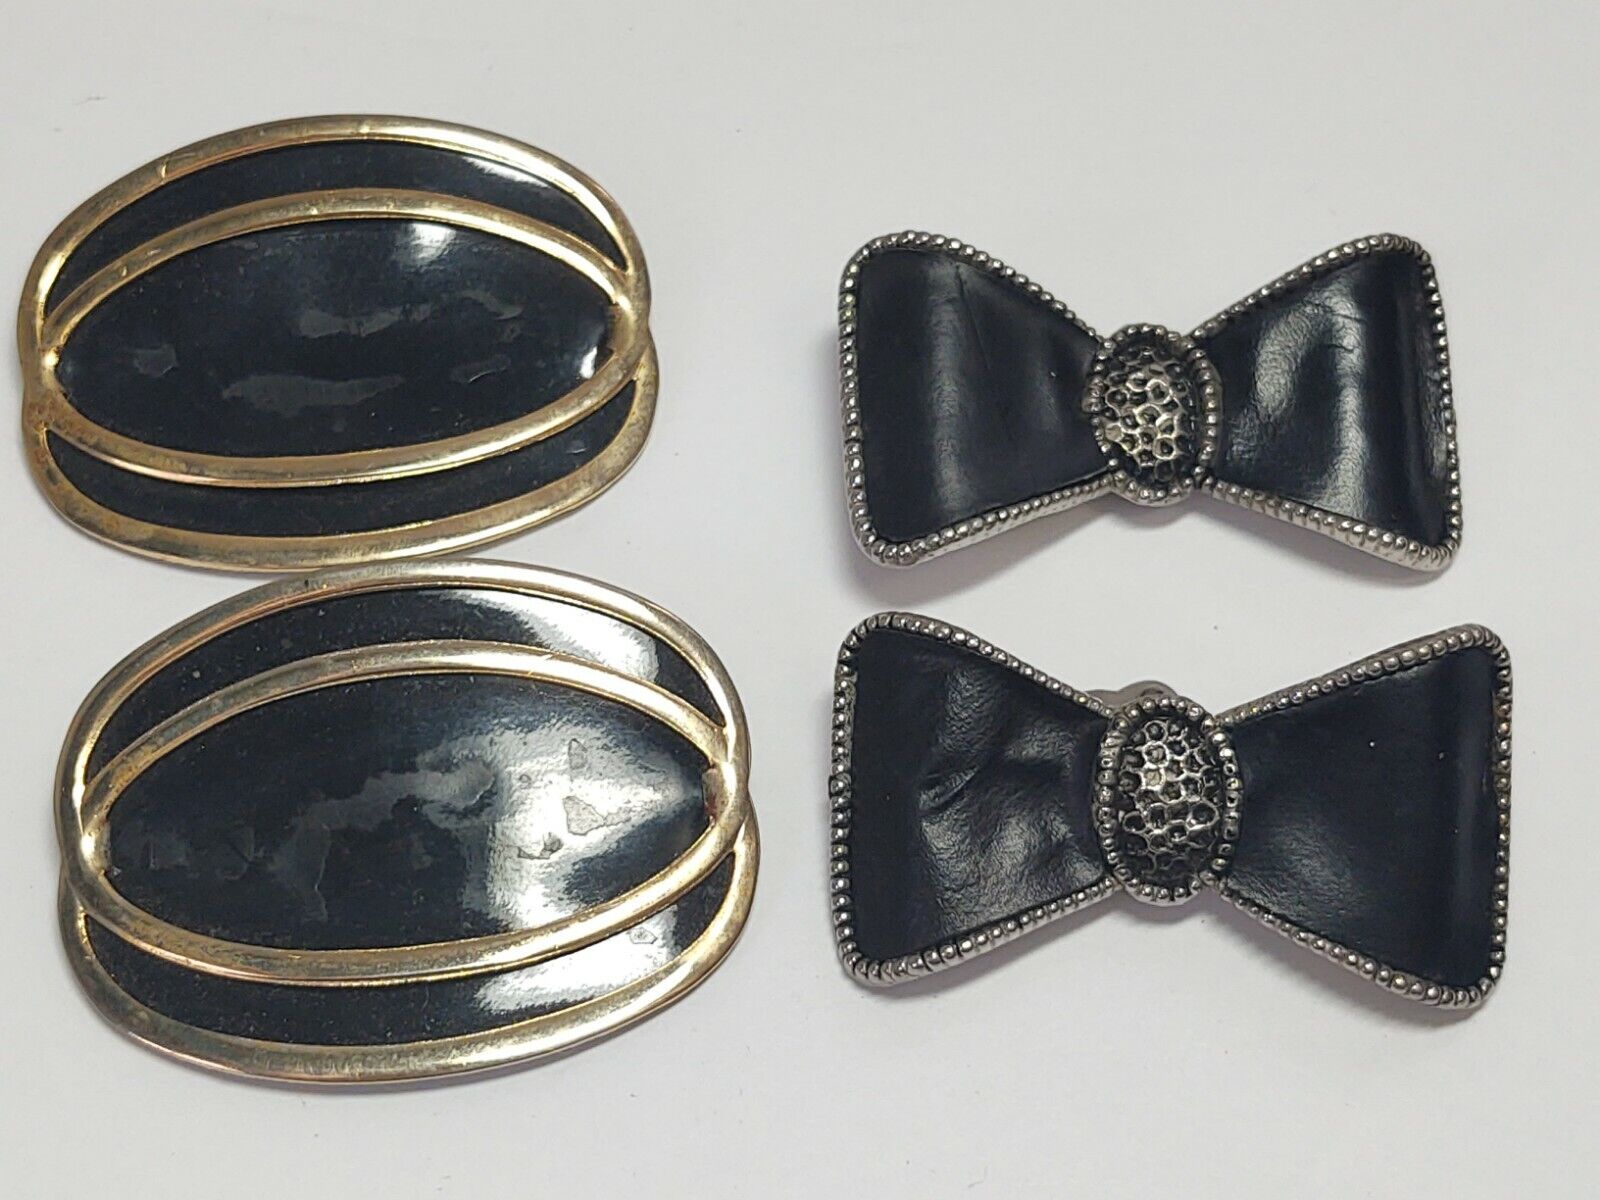 2 Sets of Plastic Shoe Clips Round with Gold Accents, Bow Shaped Molded Vintage Unbranded